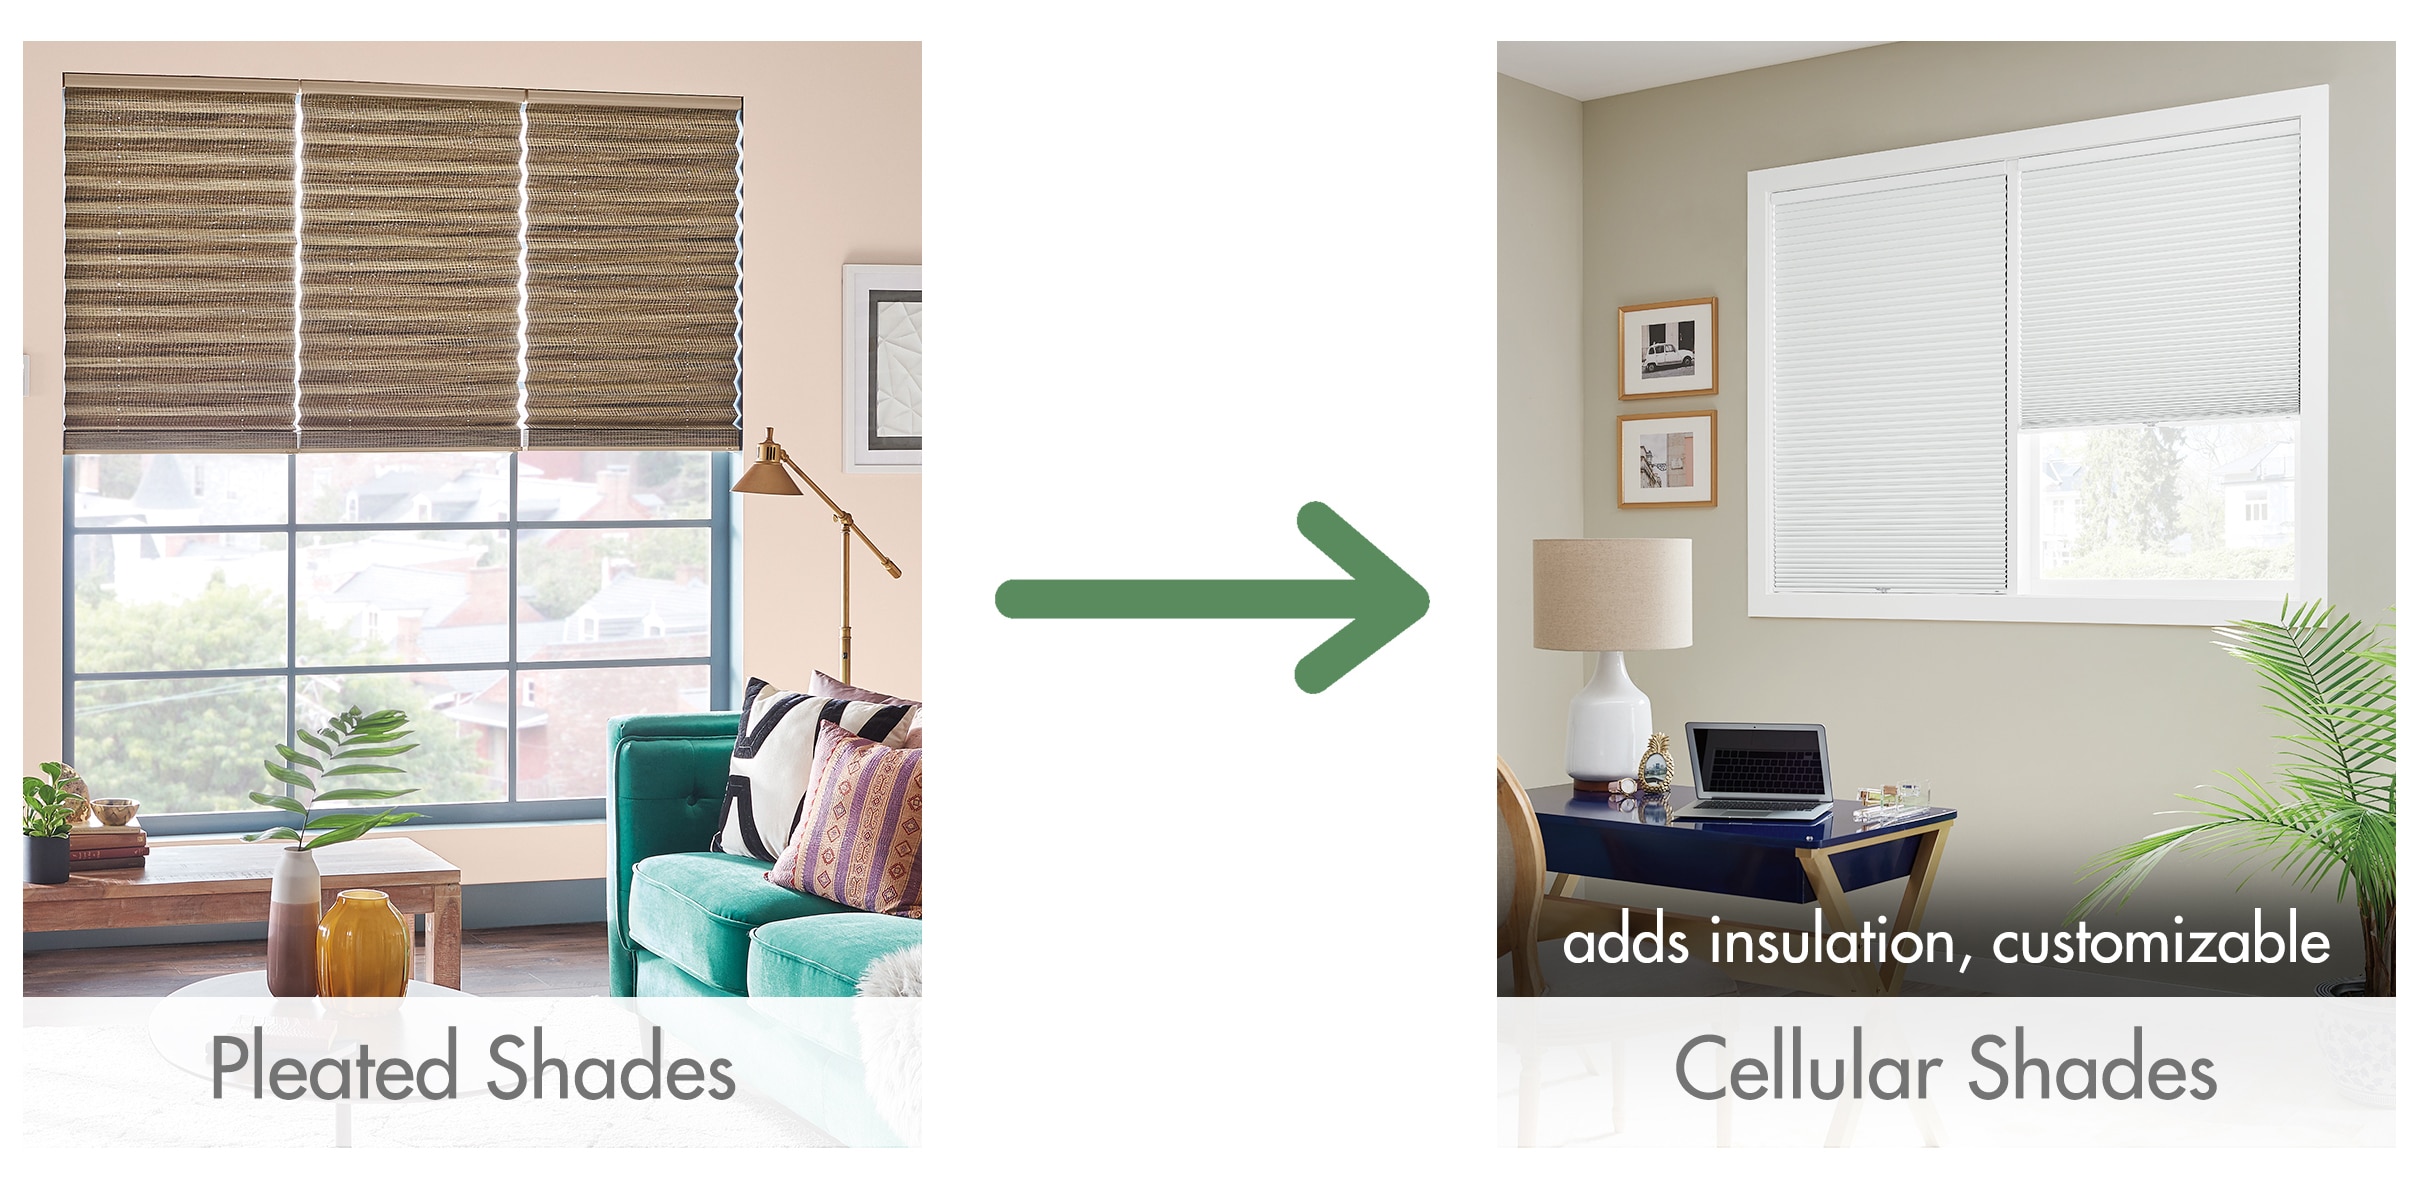 if you had pleated shades, we suggest cellular shades